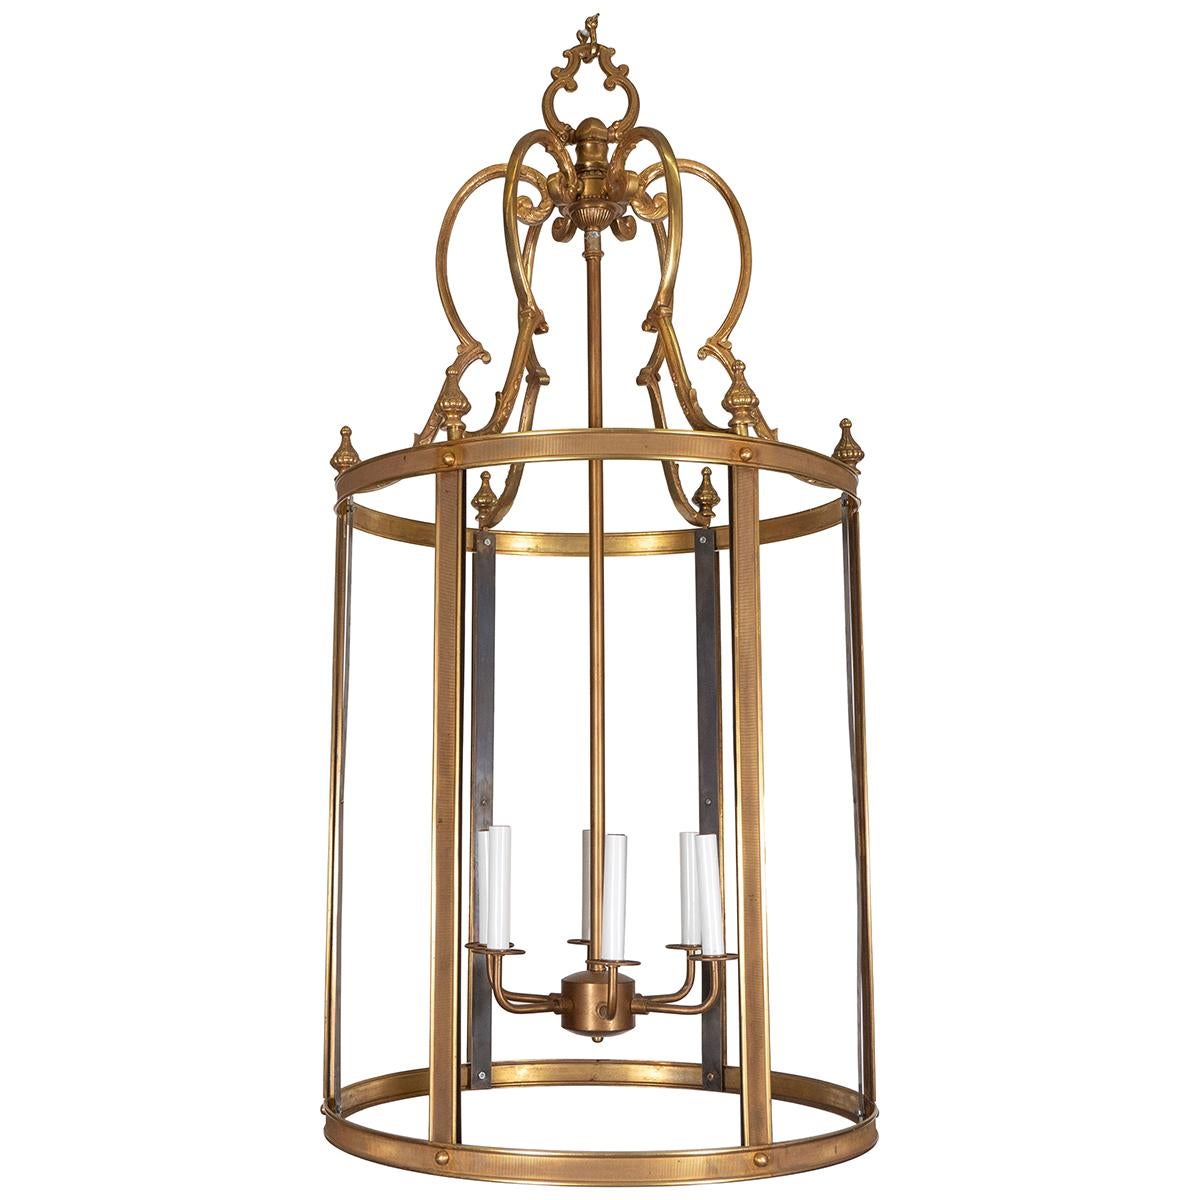 Large brass lantern with ornate finials and wrought details.